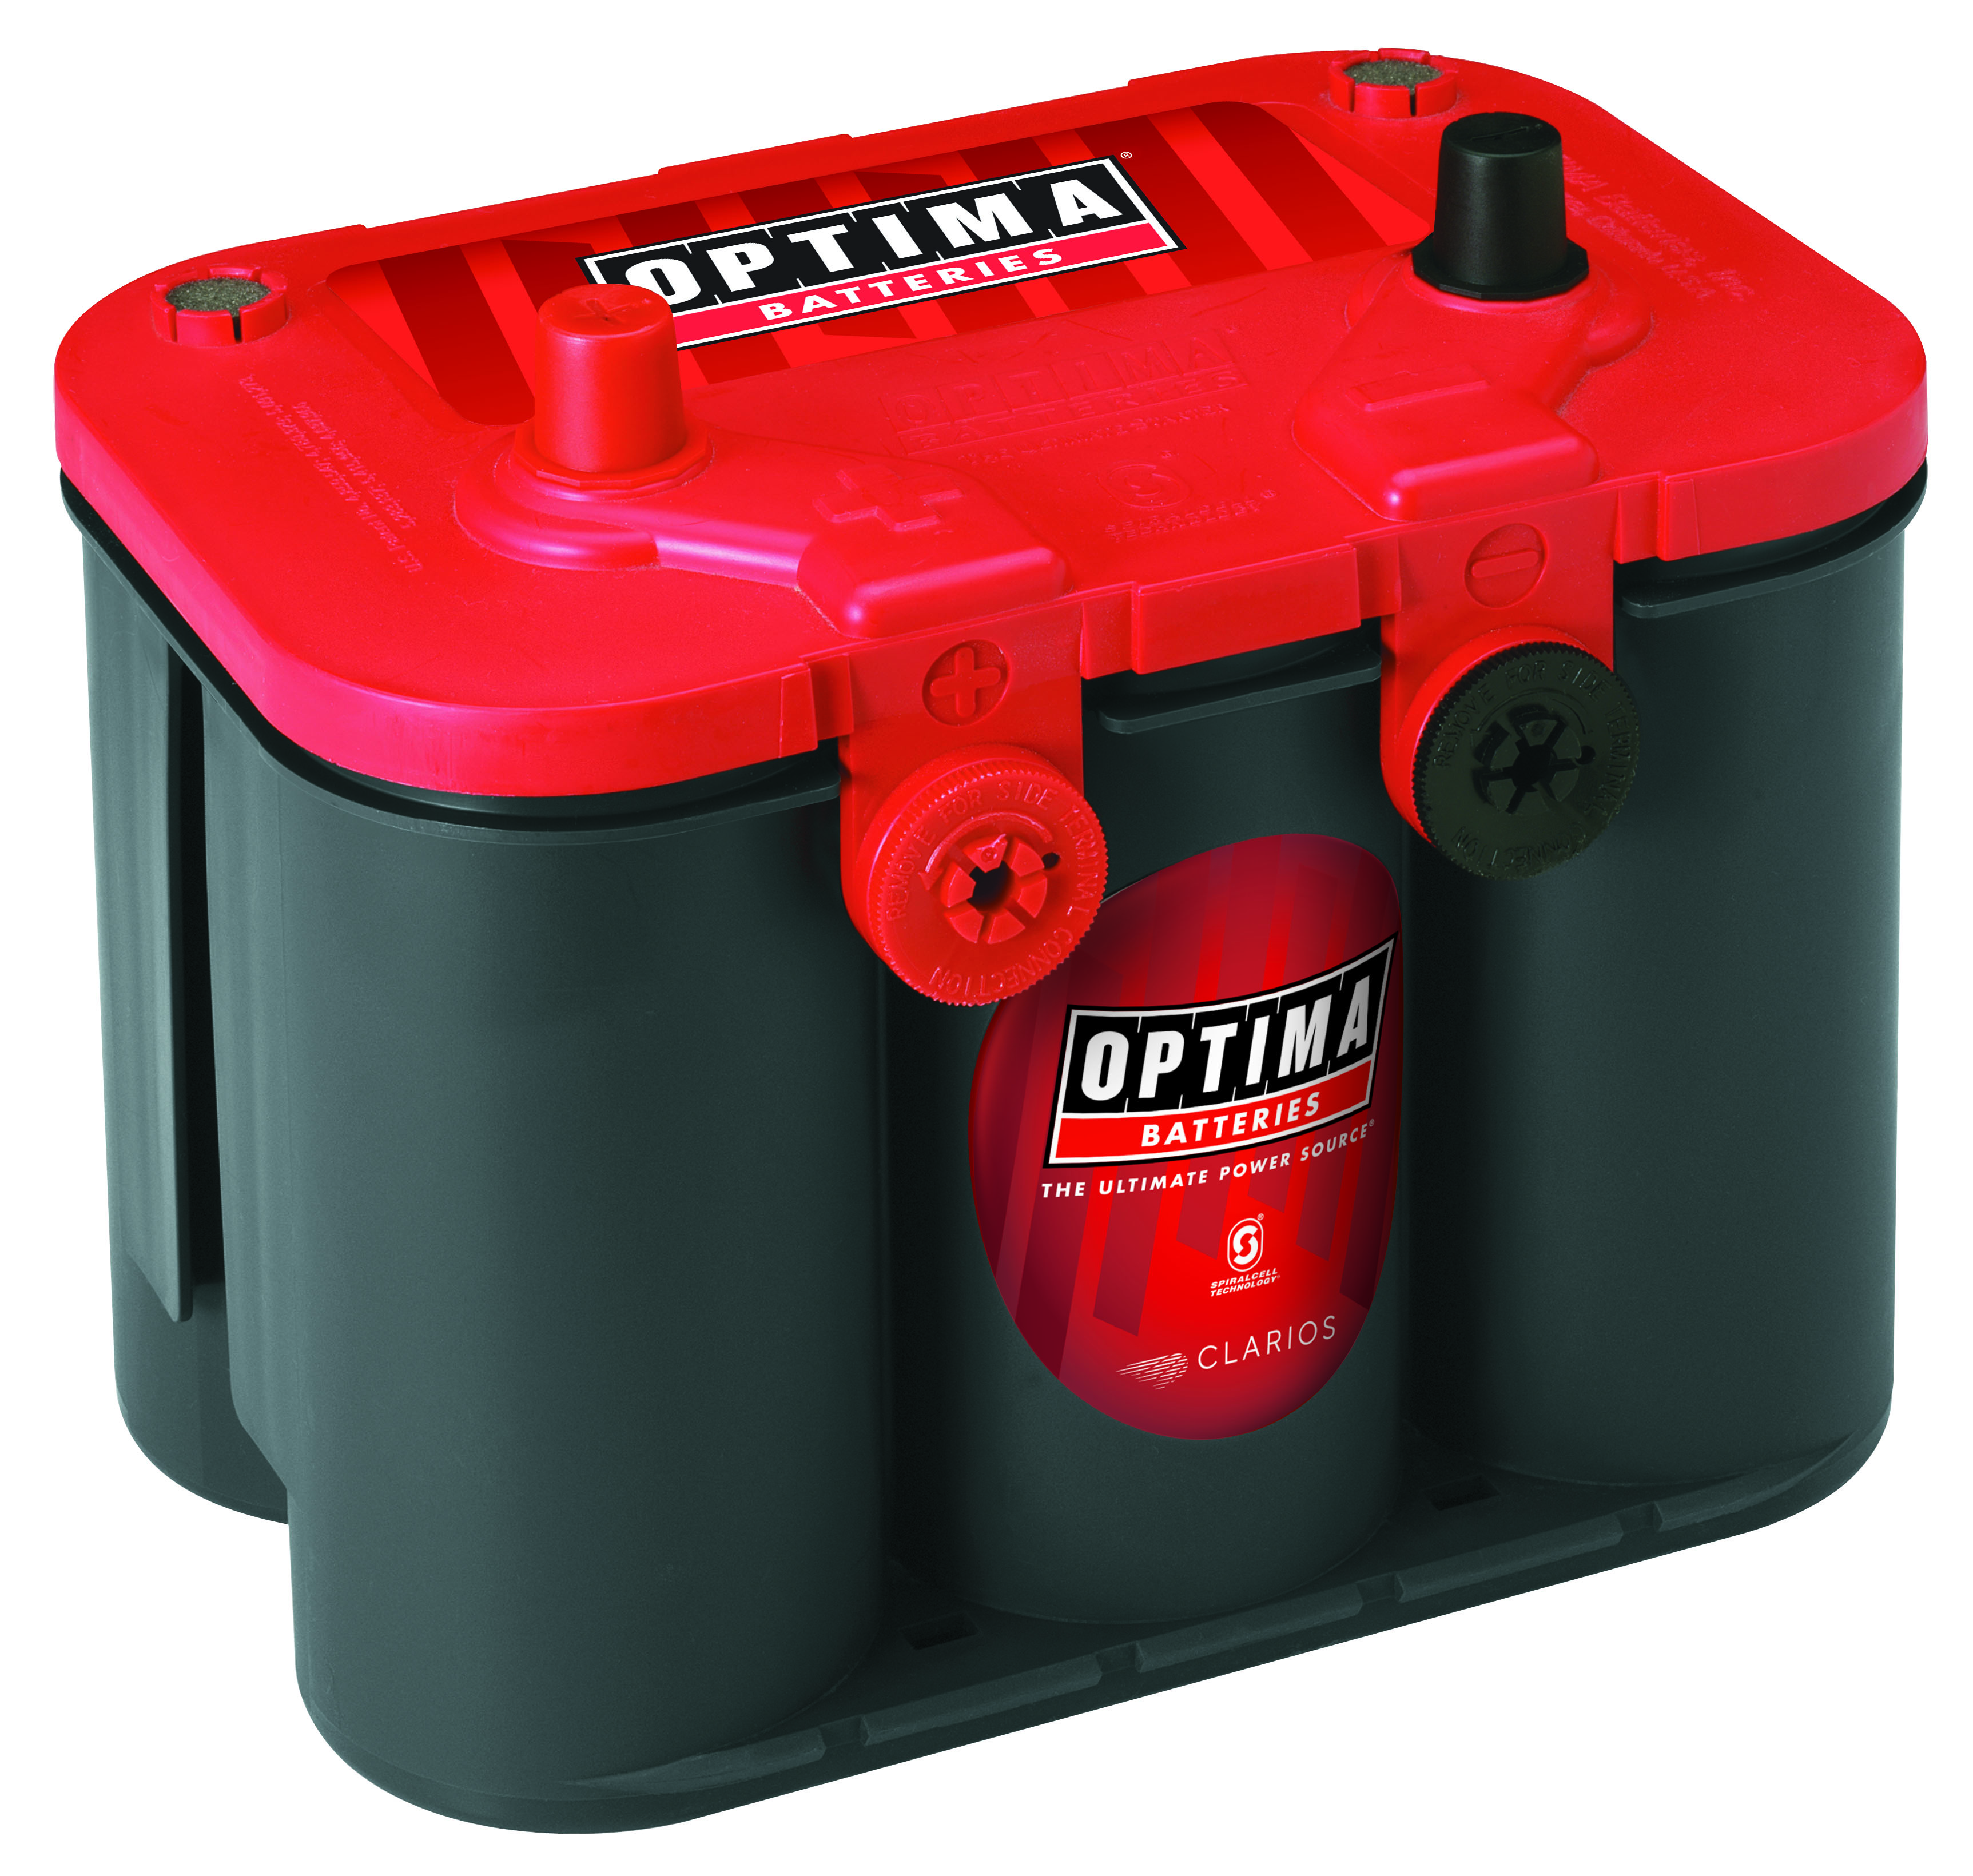 OPTIMA RedTop AGM Spiralcell Automotive Starting Battery, Group Size 34/78, 12 Volt 800 CCA - image 1 of 7